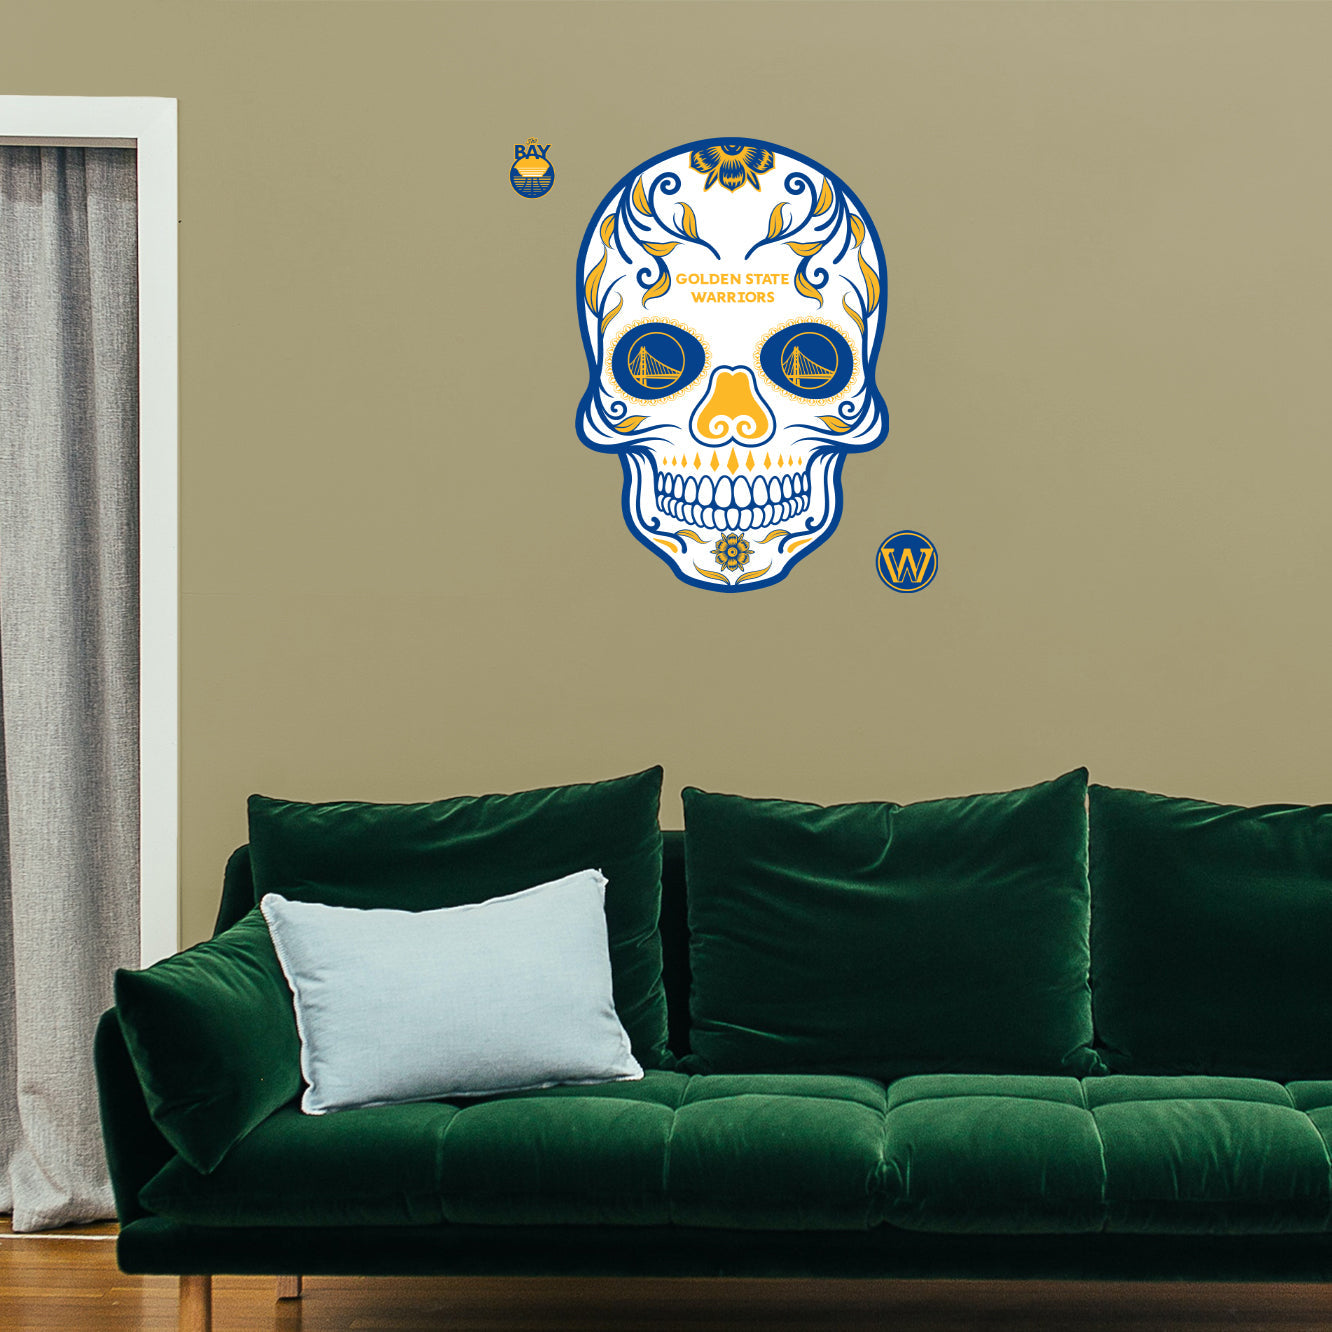 Golden State Warriors: Skull - Officially Licensed NBA Removable Adhesive Decal